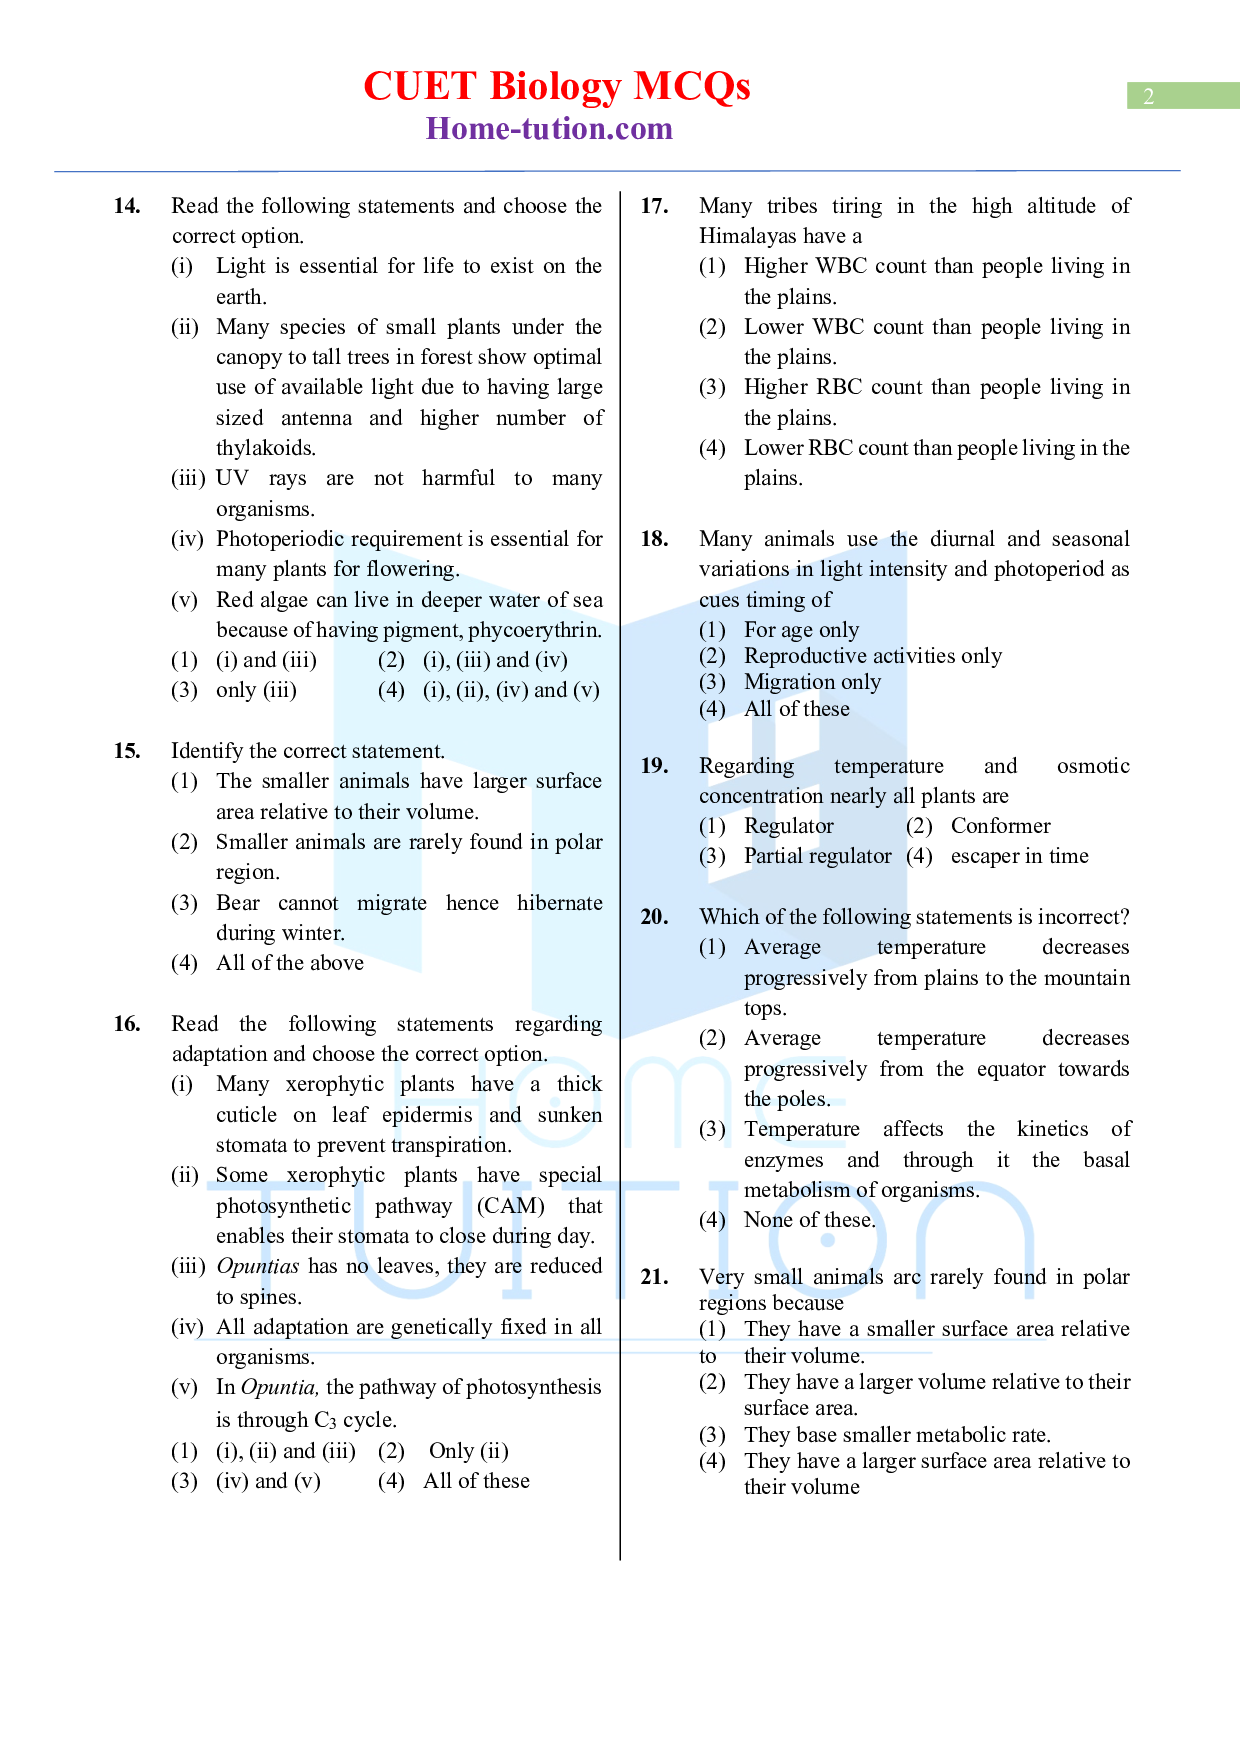 Biology MCQ Questions for CUET Chapter 13 Organisms and Populations